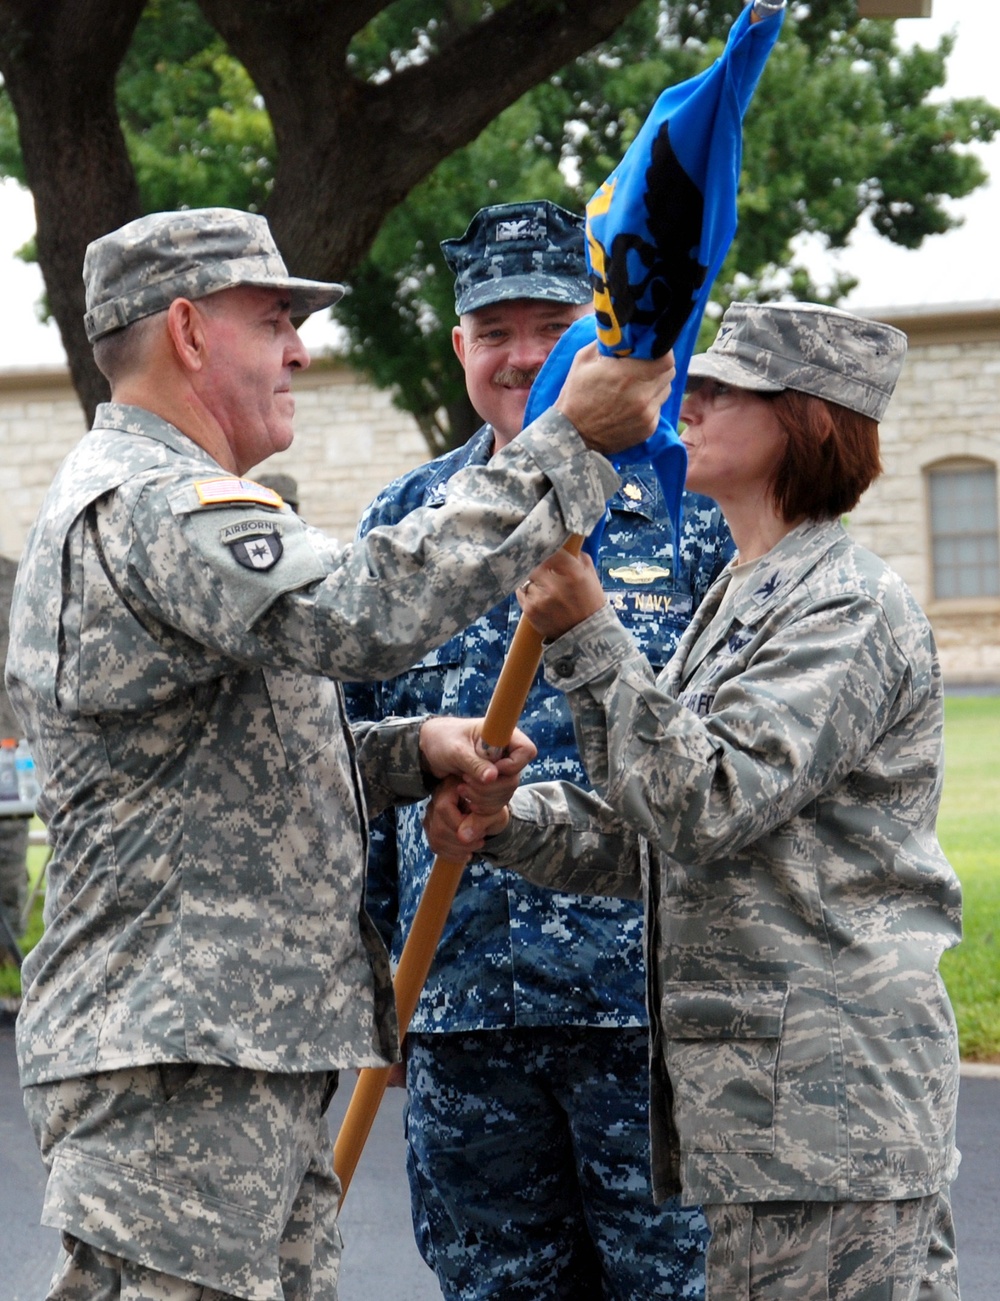 Garr takes command at Defense Medical Readiness Training Institute